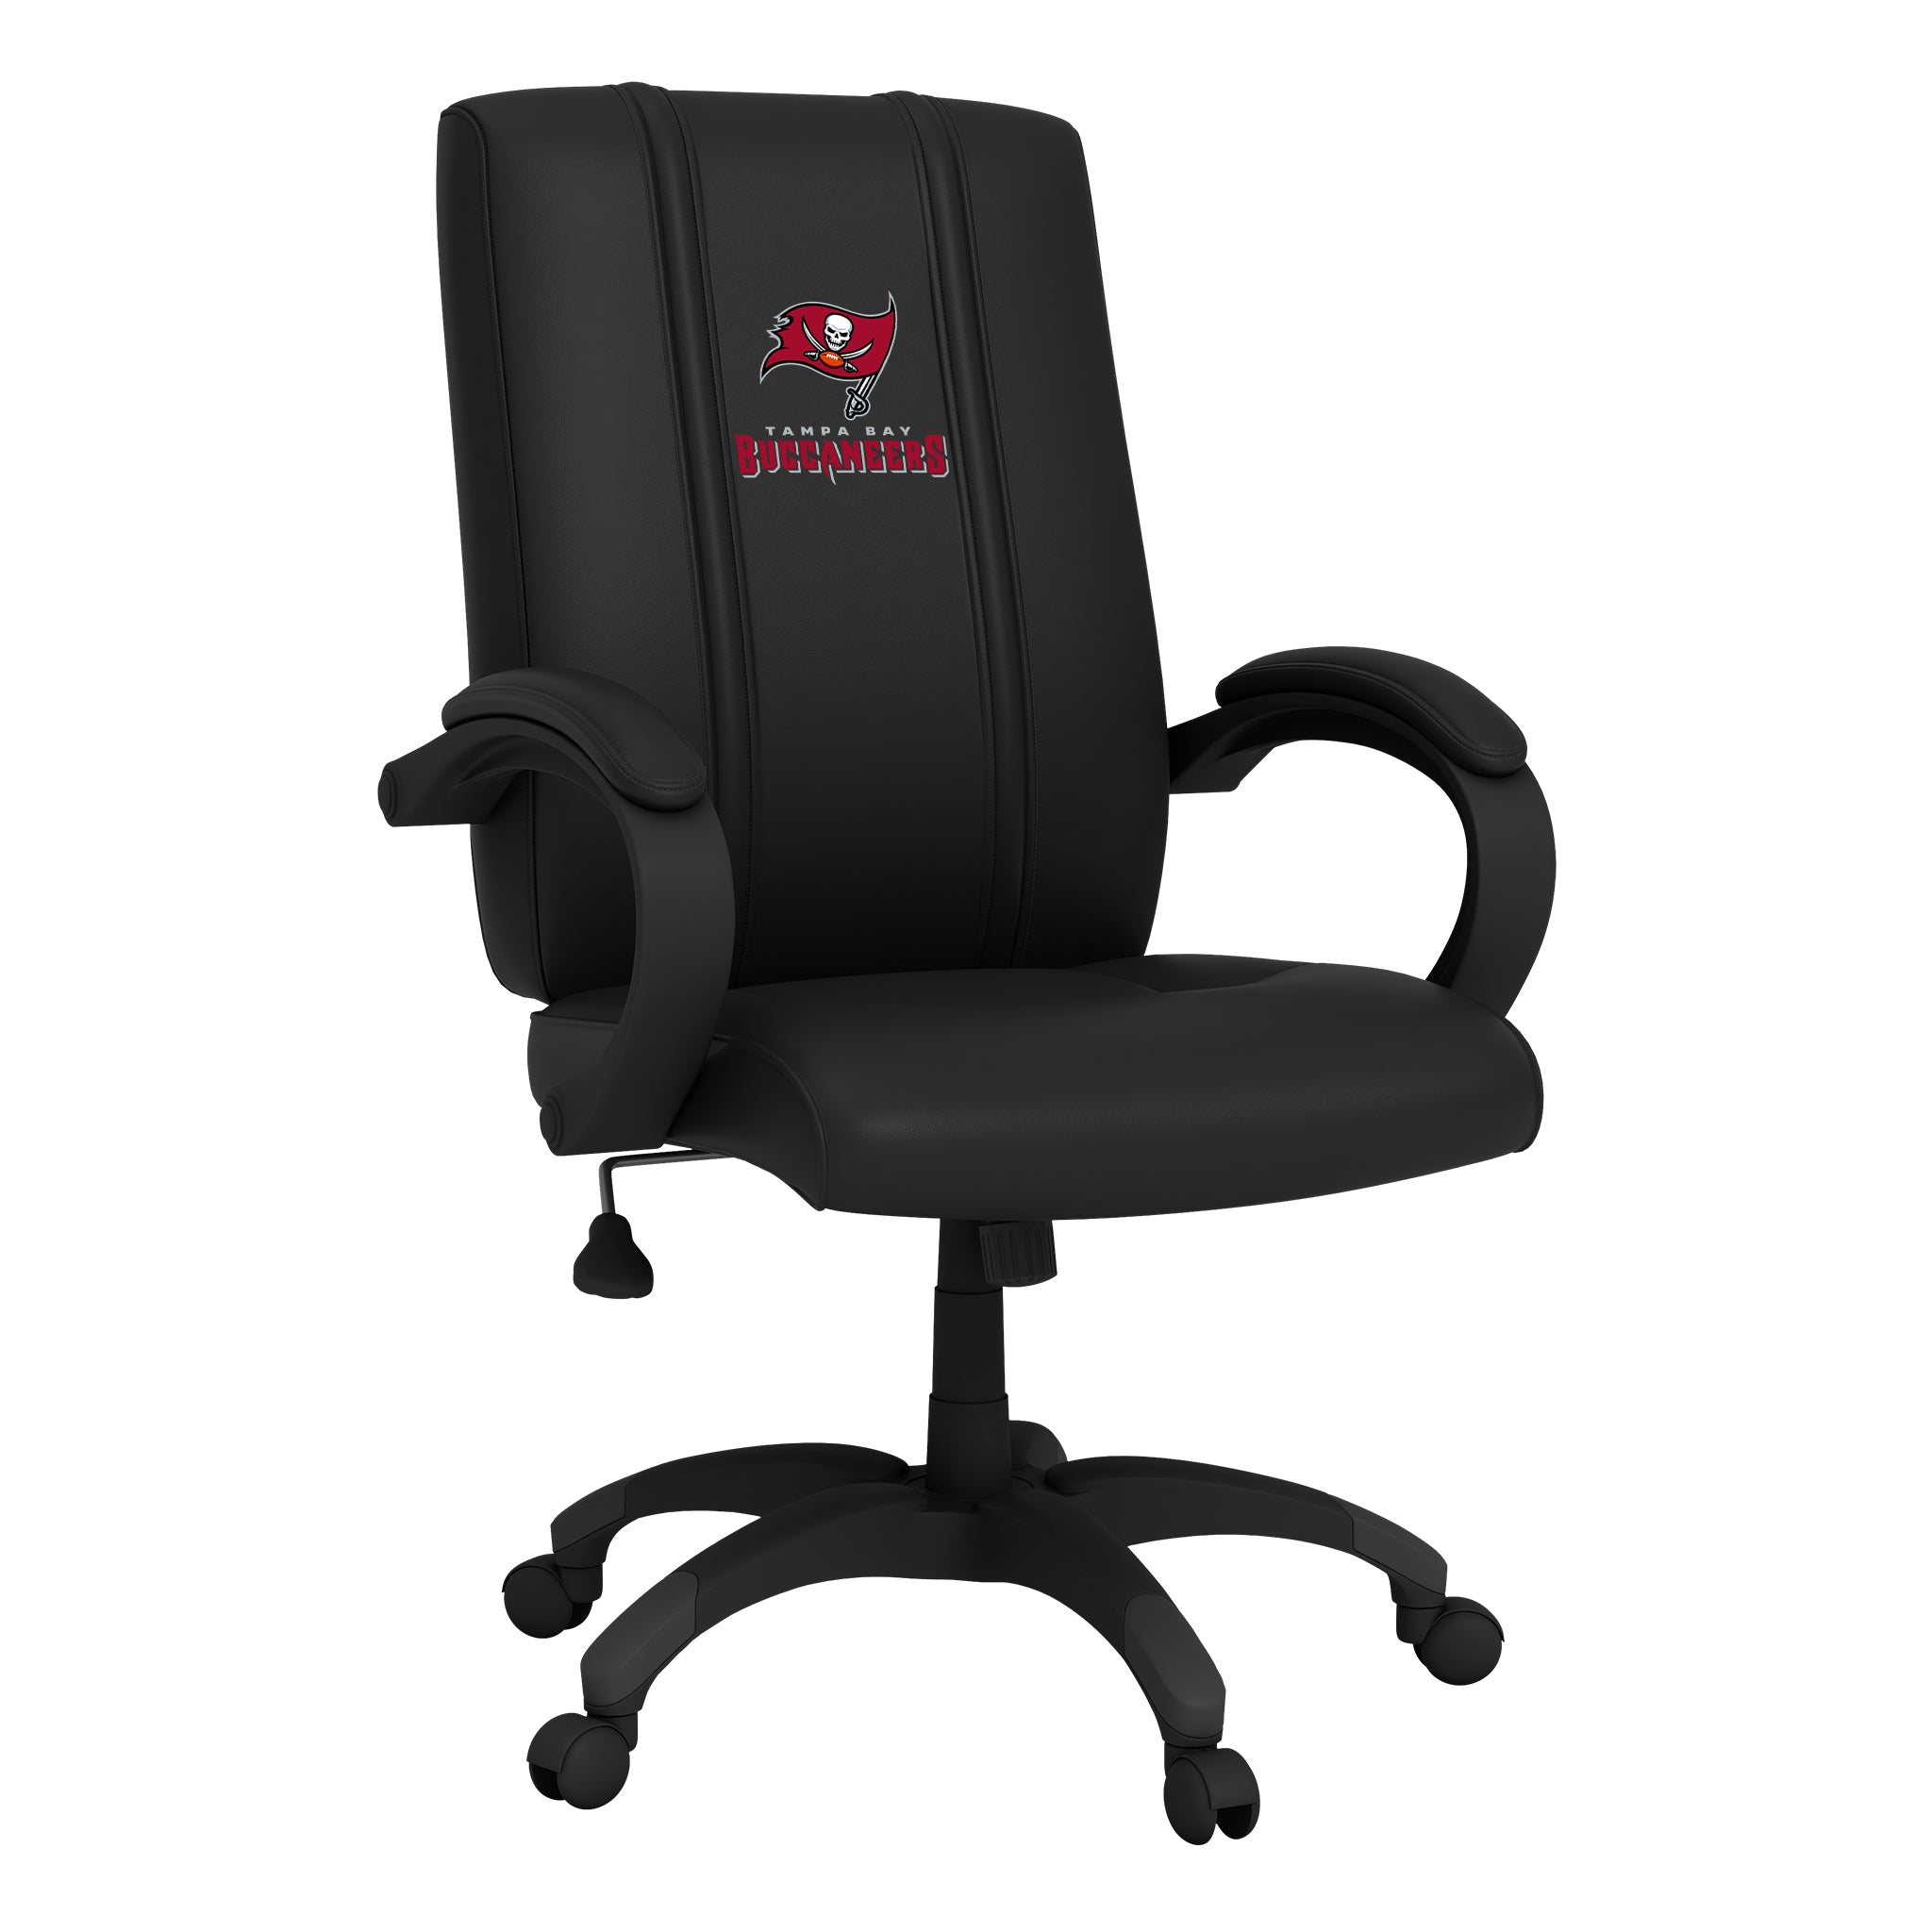 Tampa Bay Buccaneers Office Chair 1000